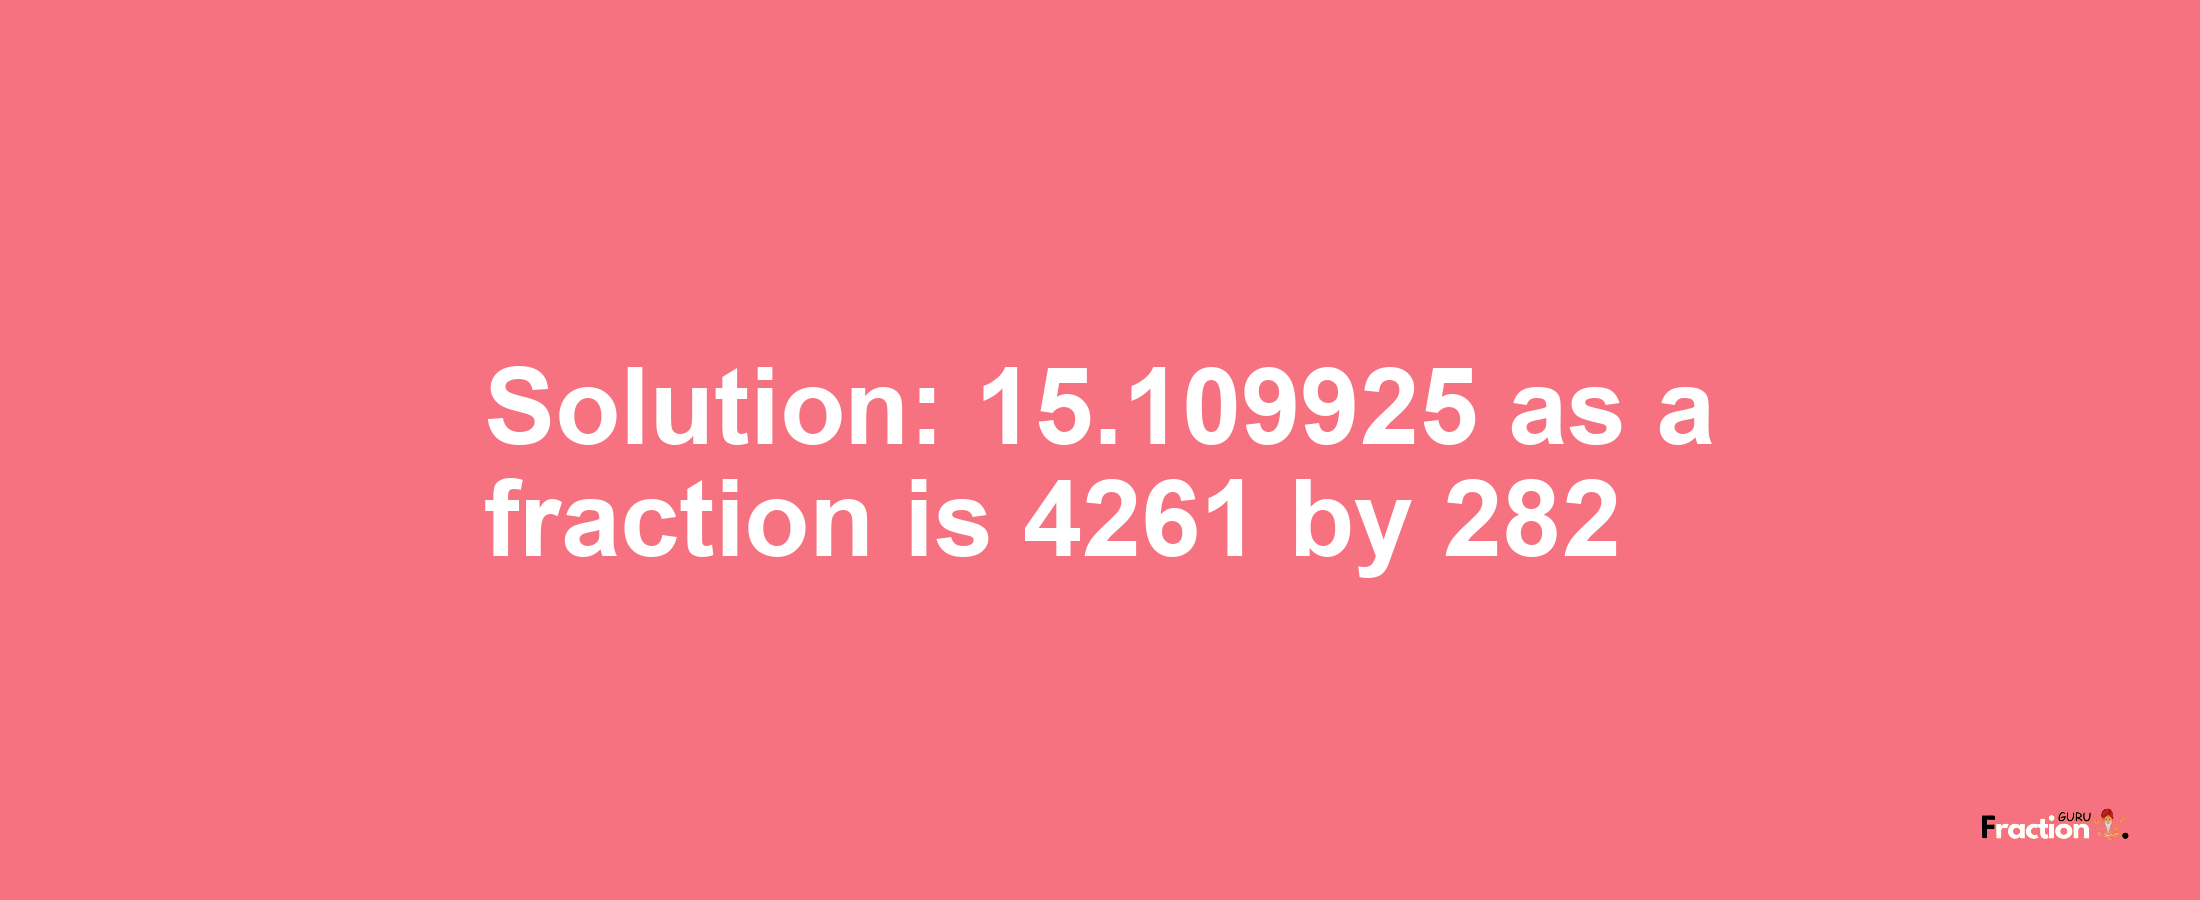 Solution:15.109925 as a fraction is 4261/282